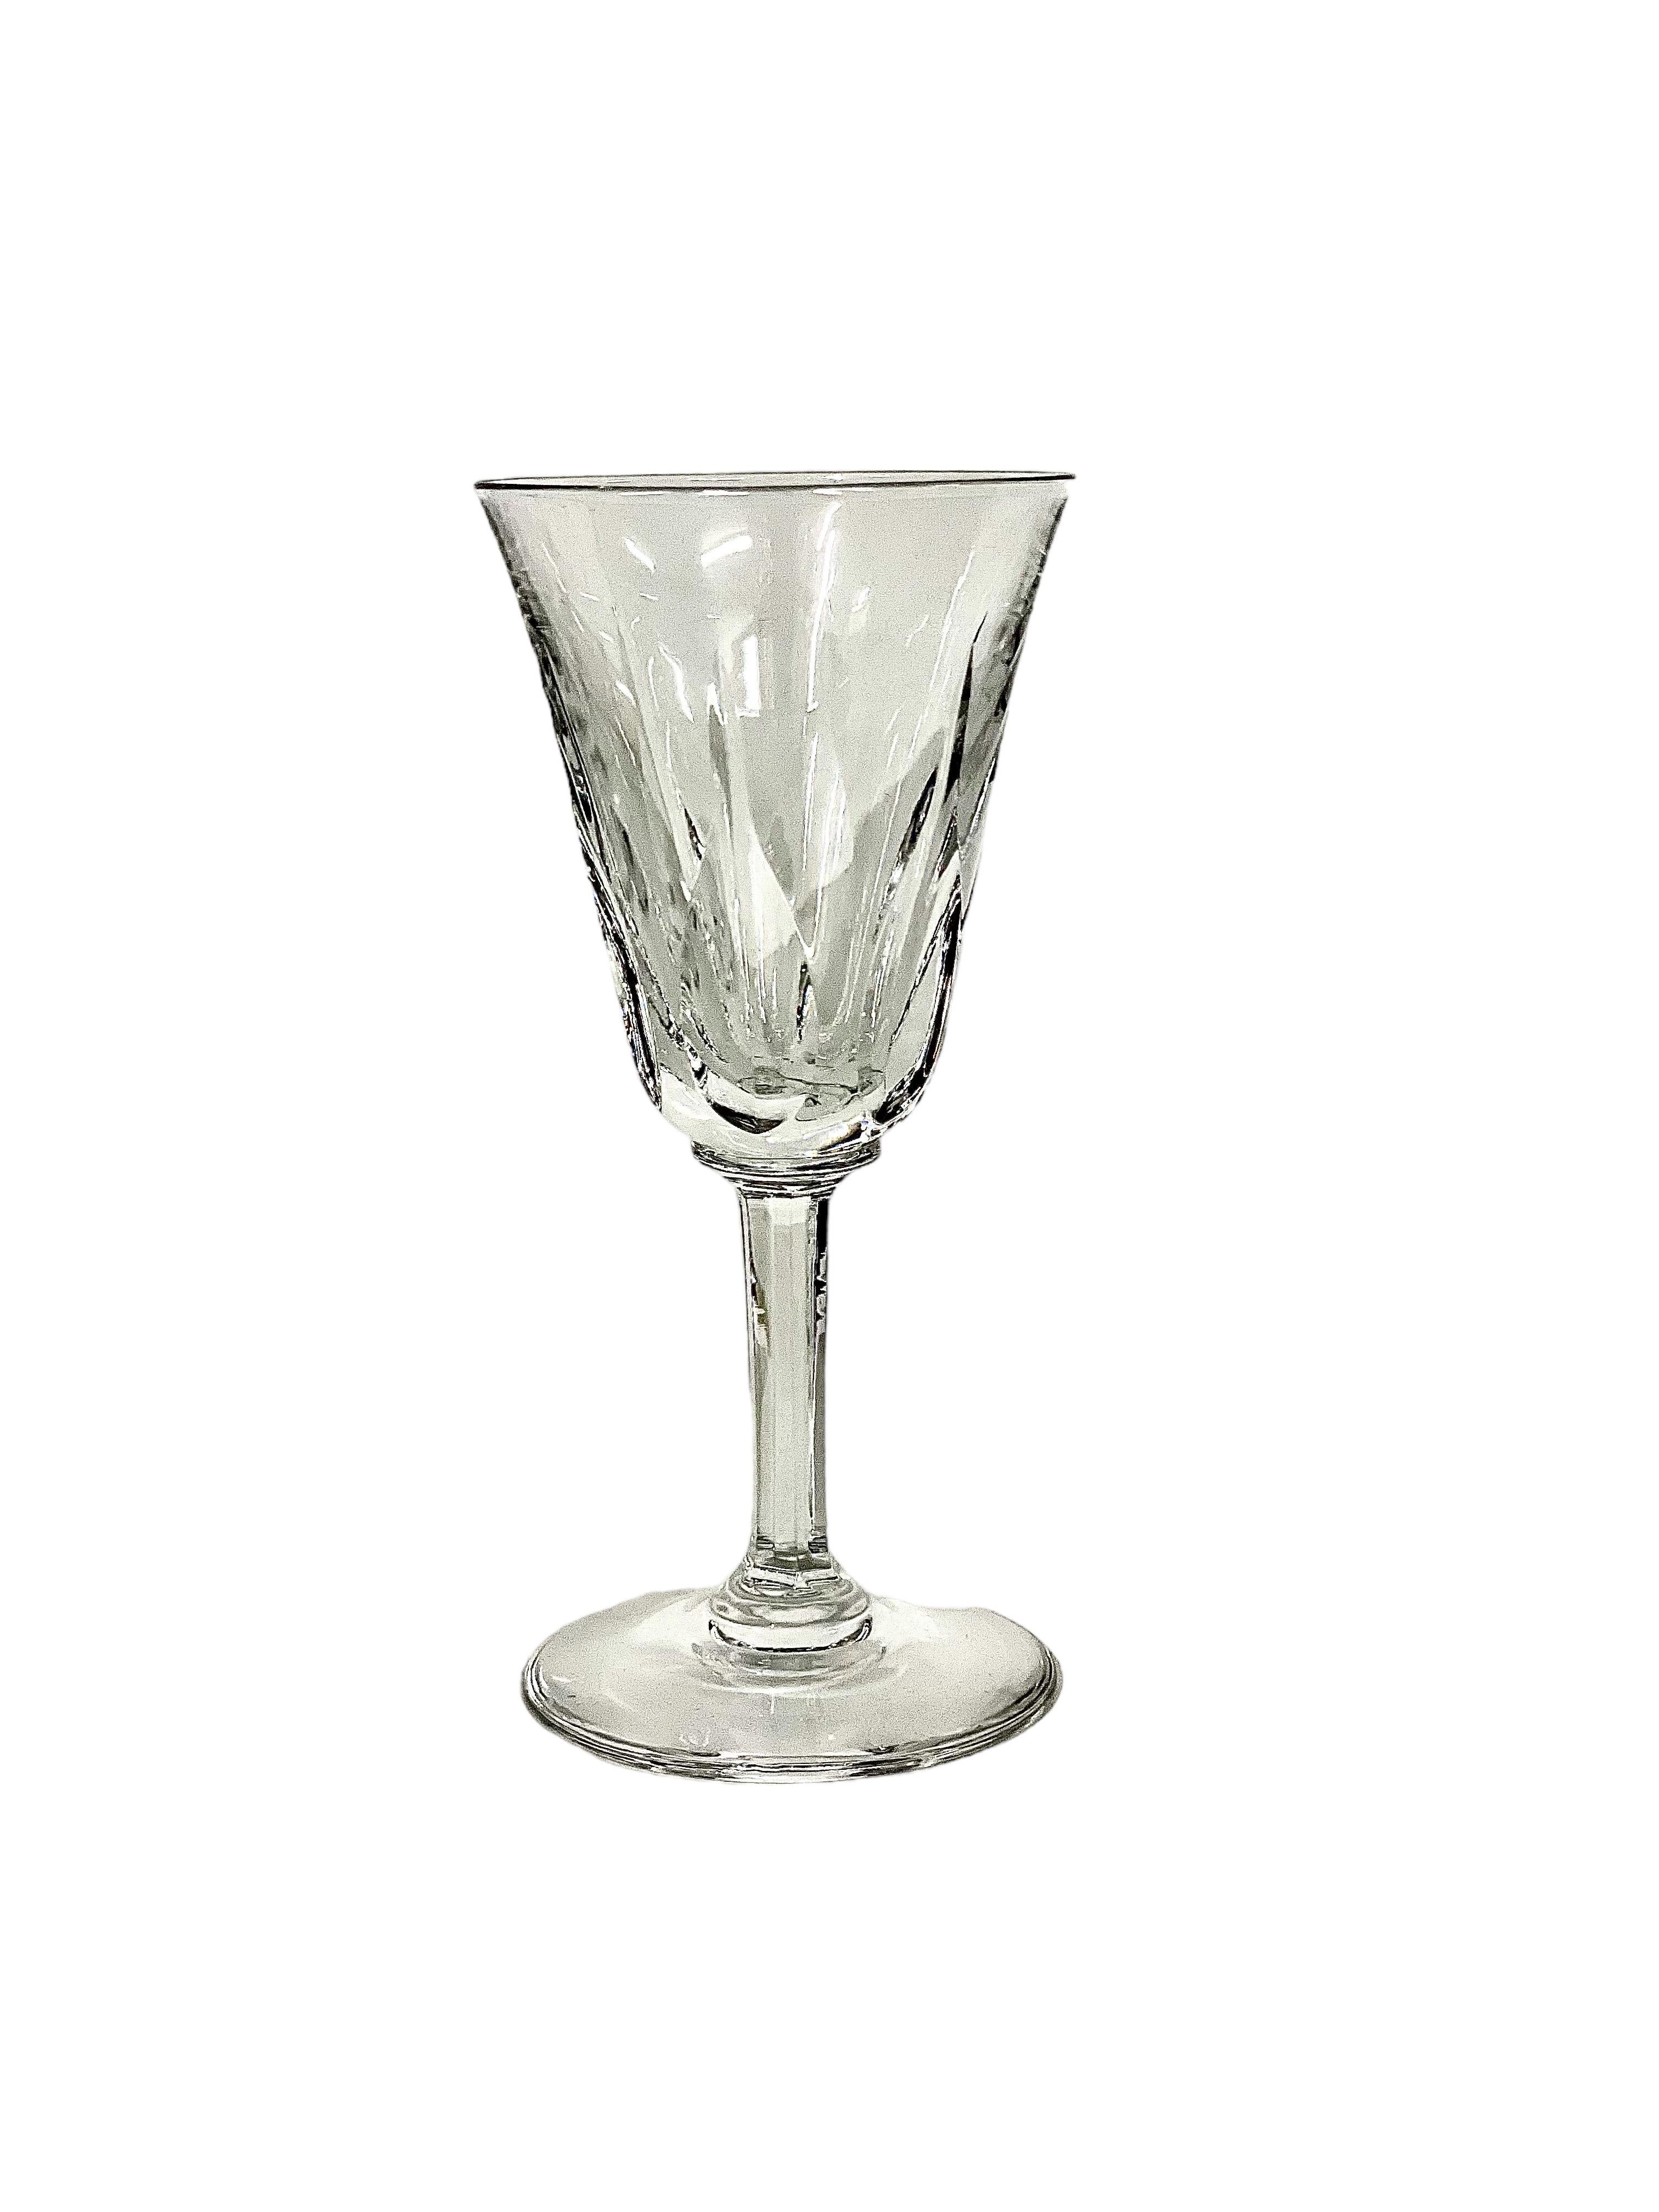 An exceptional set of 7 crystal water glasses in sparkling Saint-Louis crystal. The tulip-shaped chalice of each is cut with tall and pointed lozenges, while the stem features elegantly cut flat ribs. The glasses are all stamped 'Saint-Louis' under